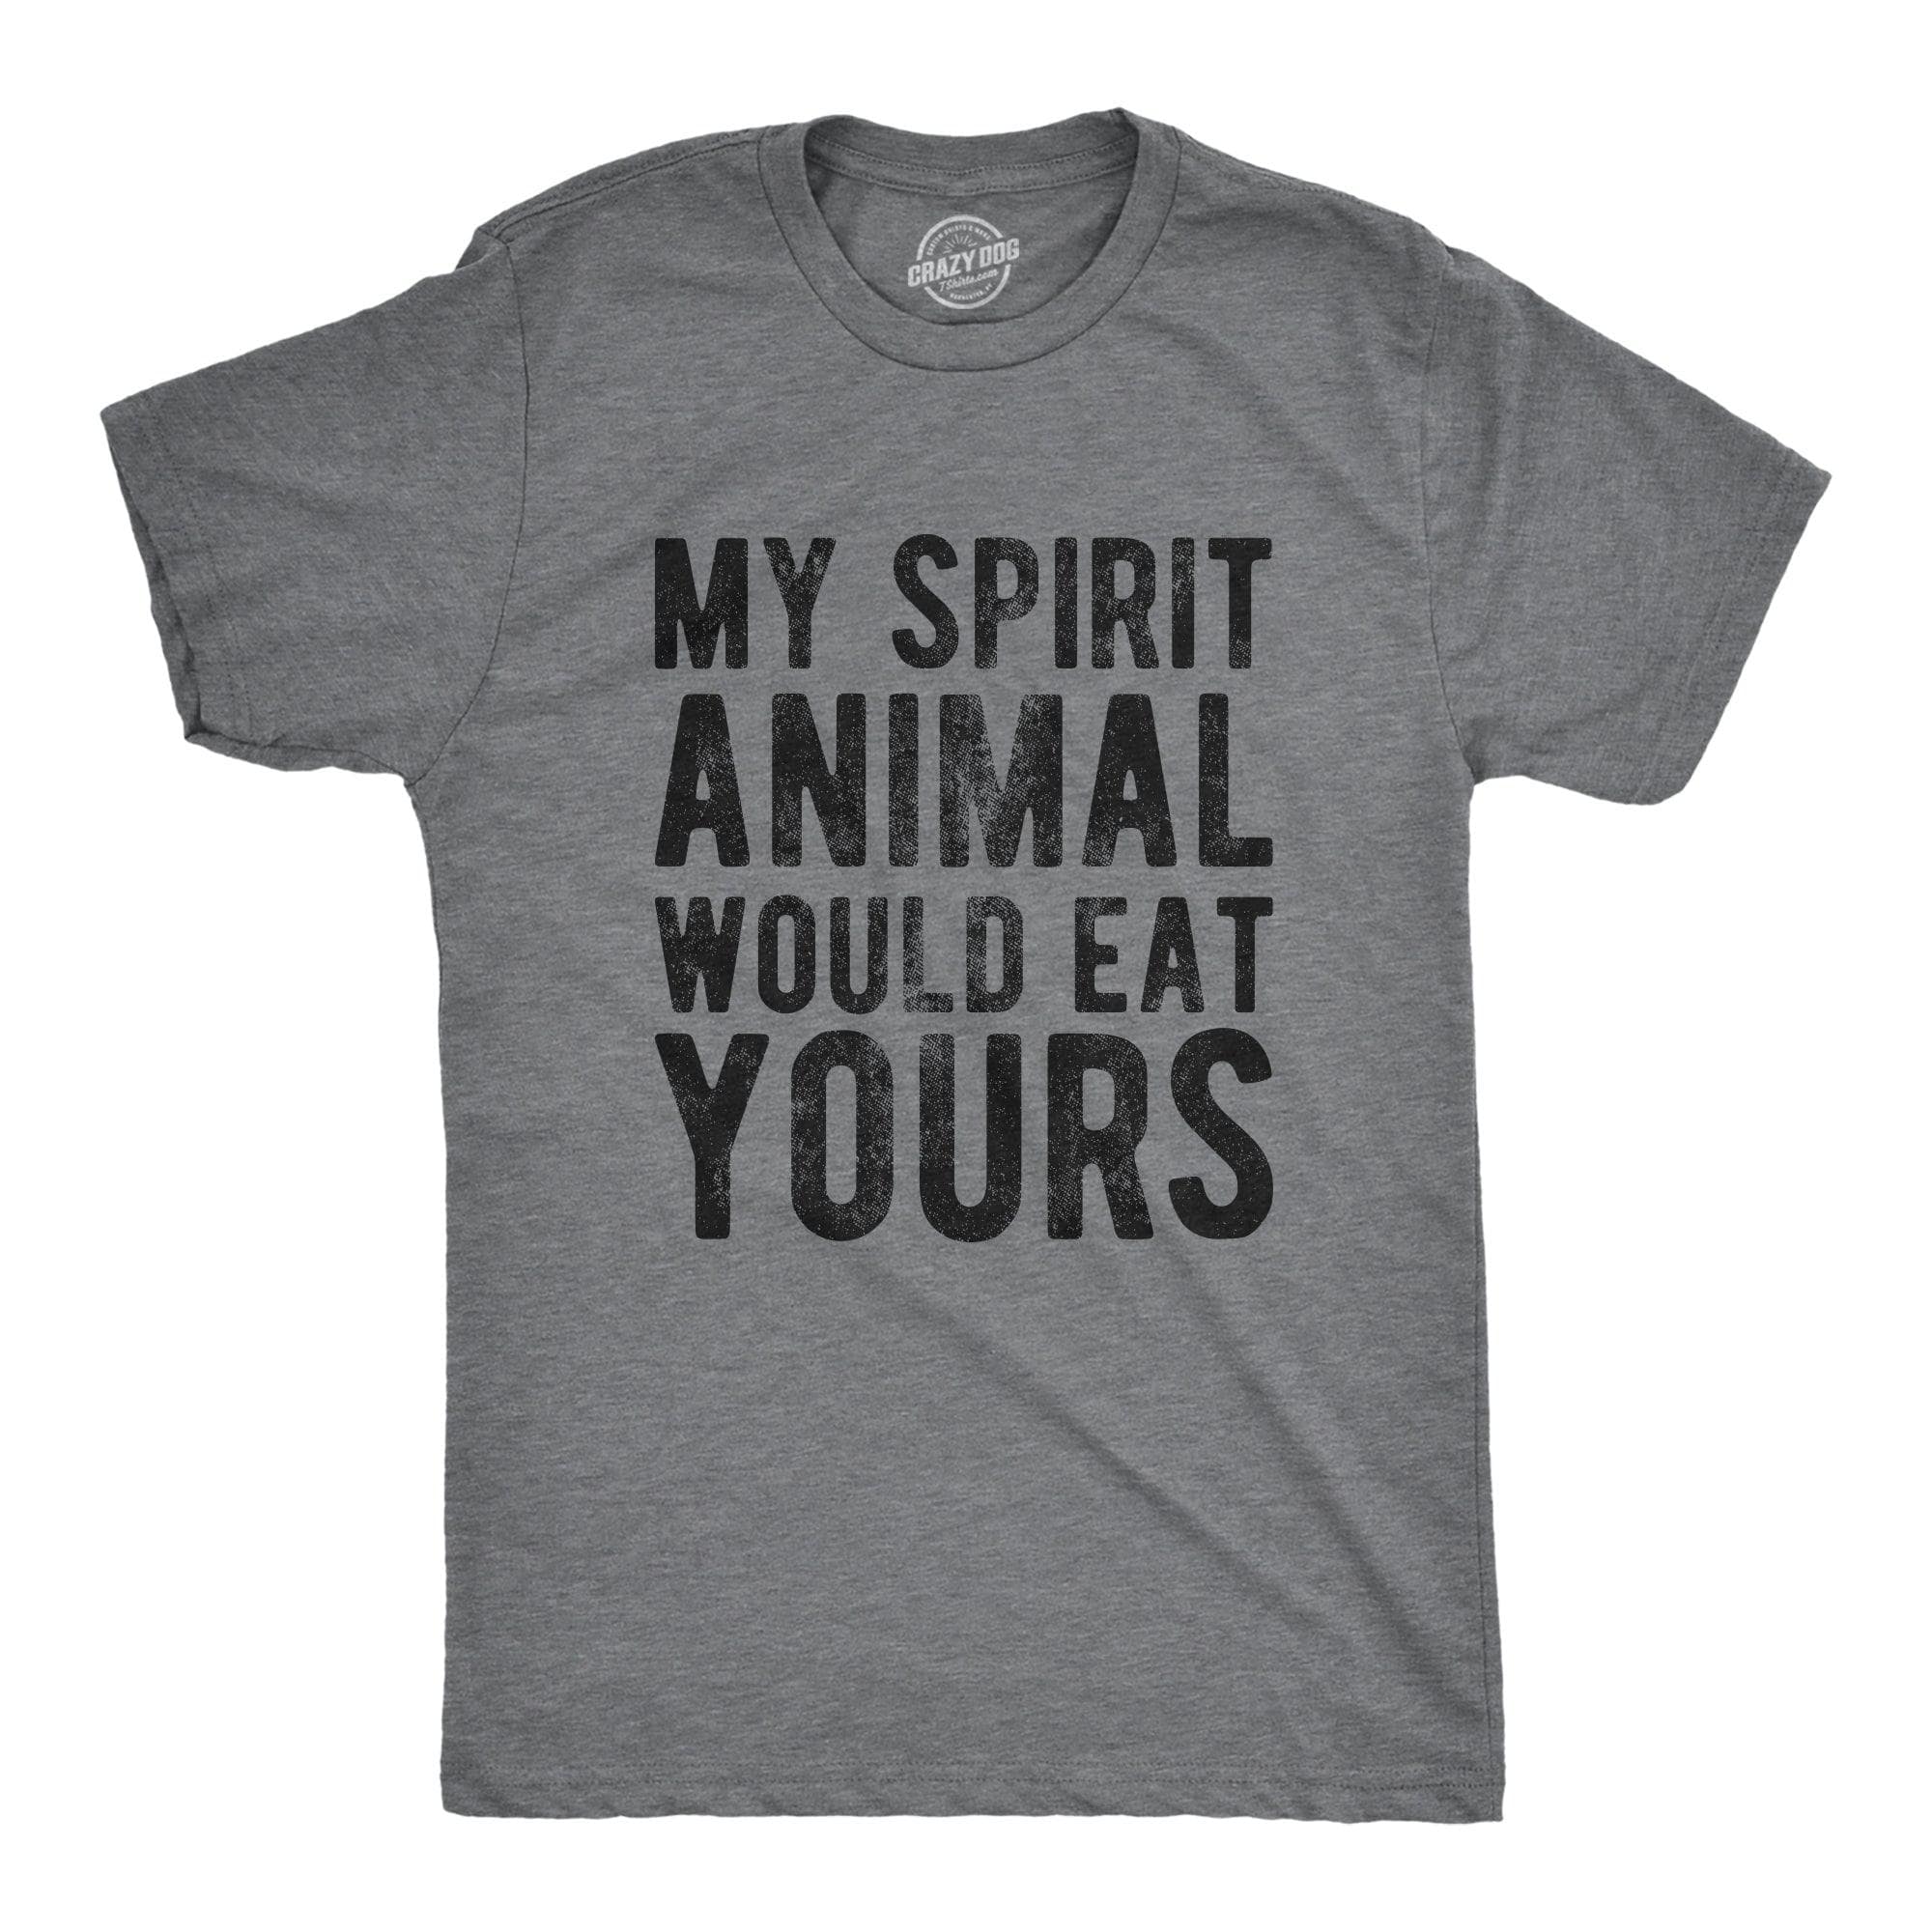 My Spirit Animal Would Eat Yours Men's Tshirt  -  Crazy Dog T-Shirts